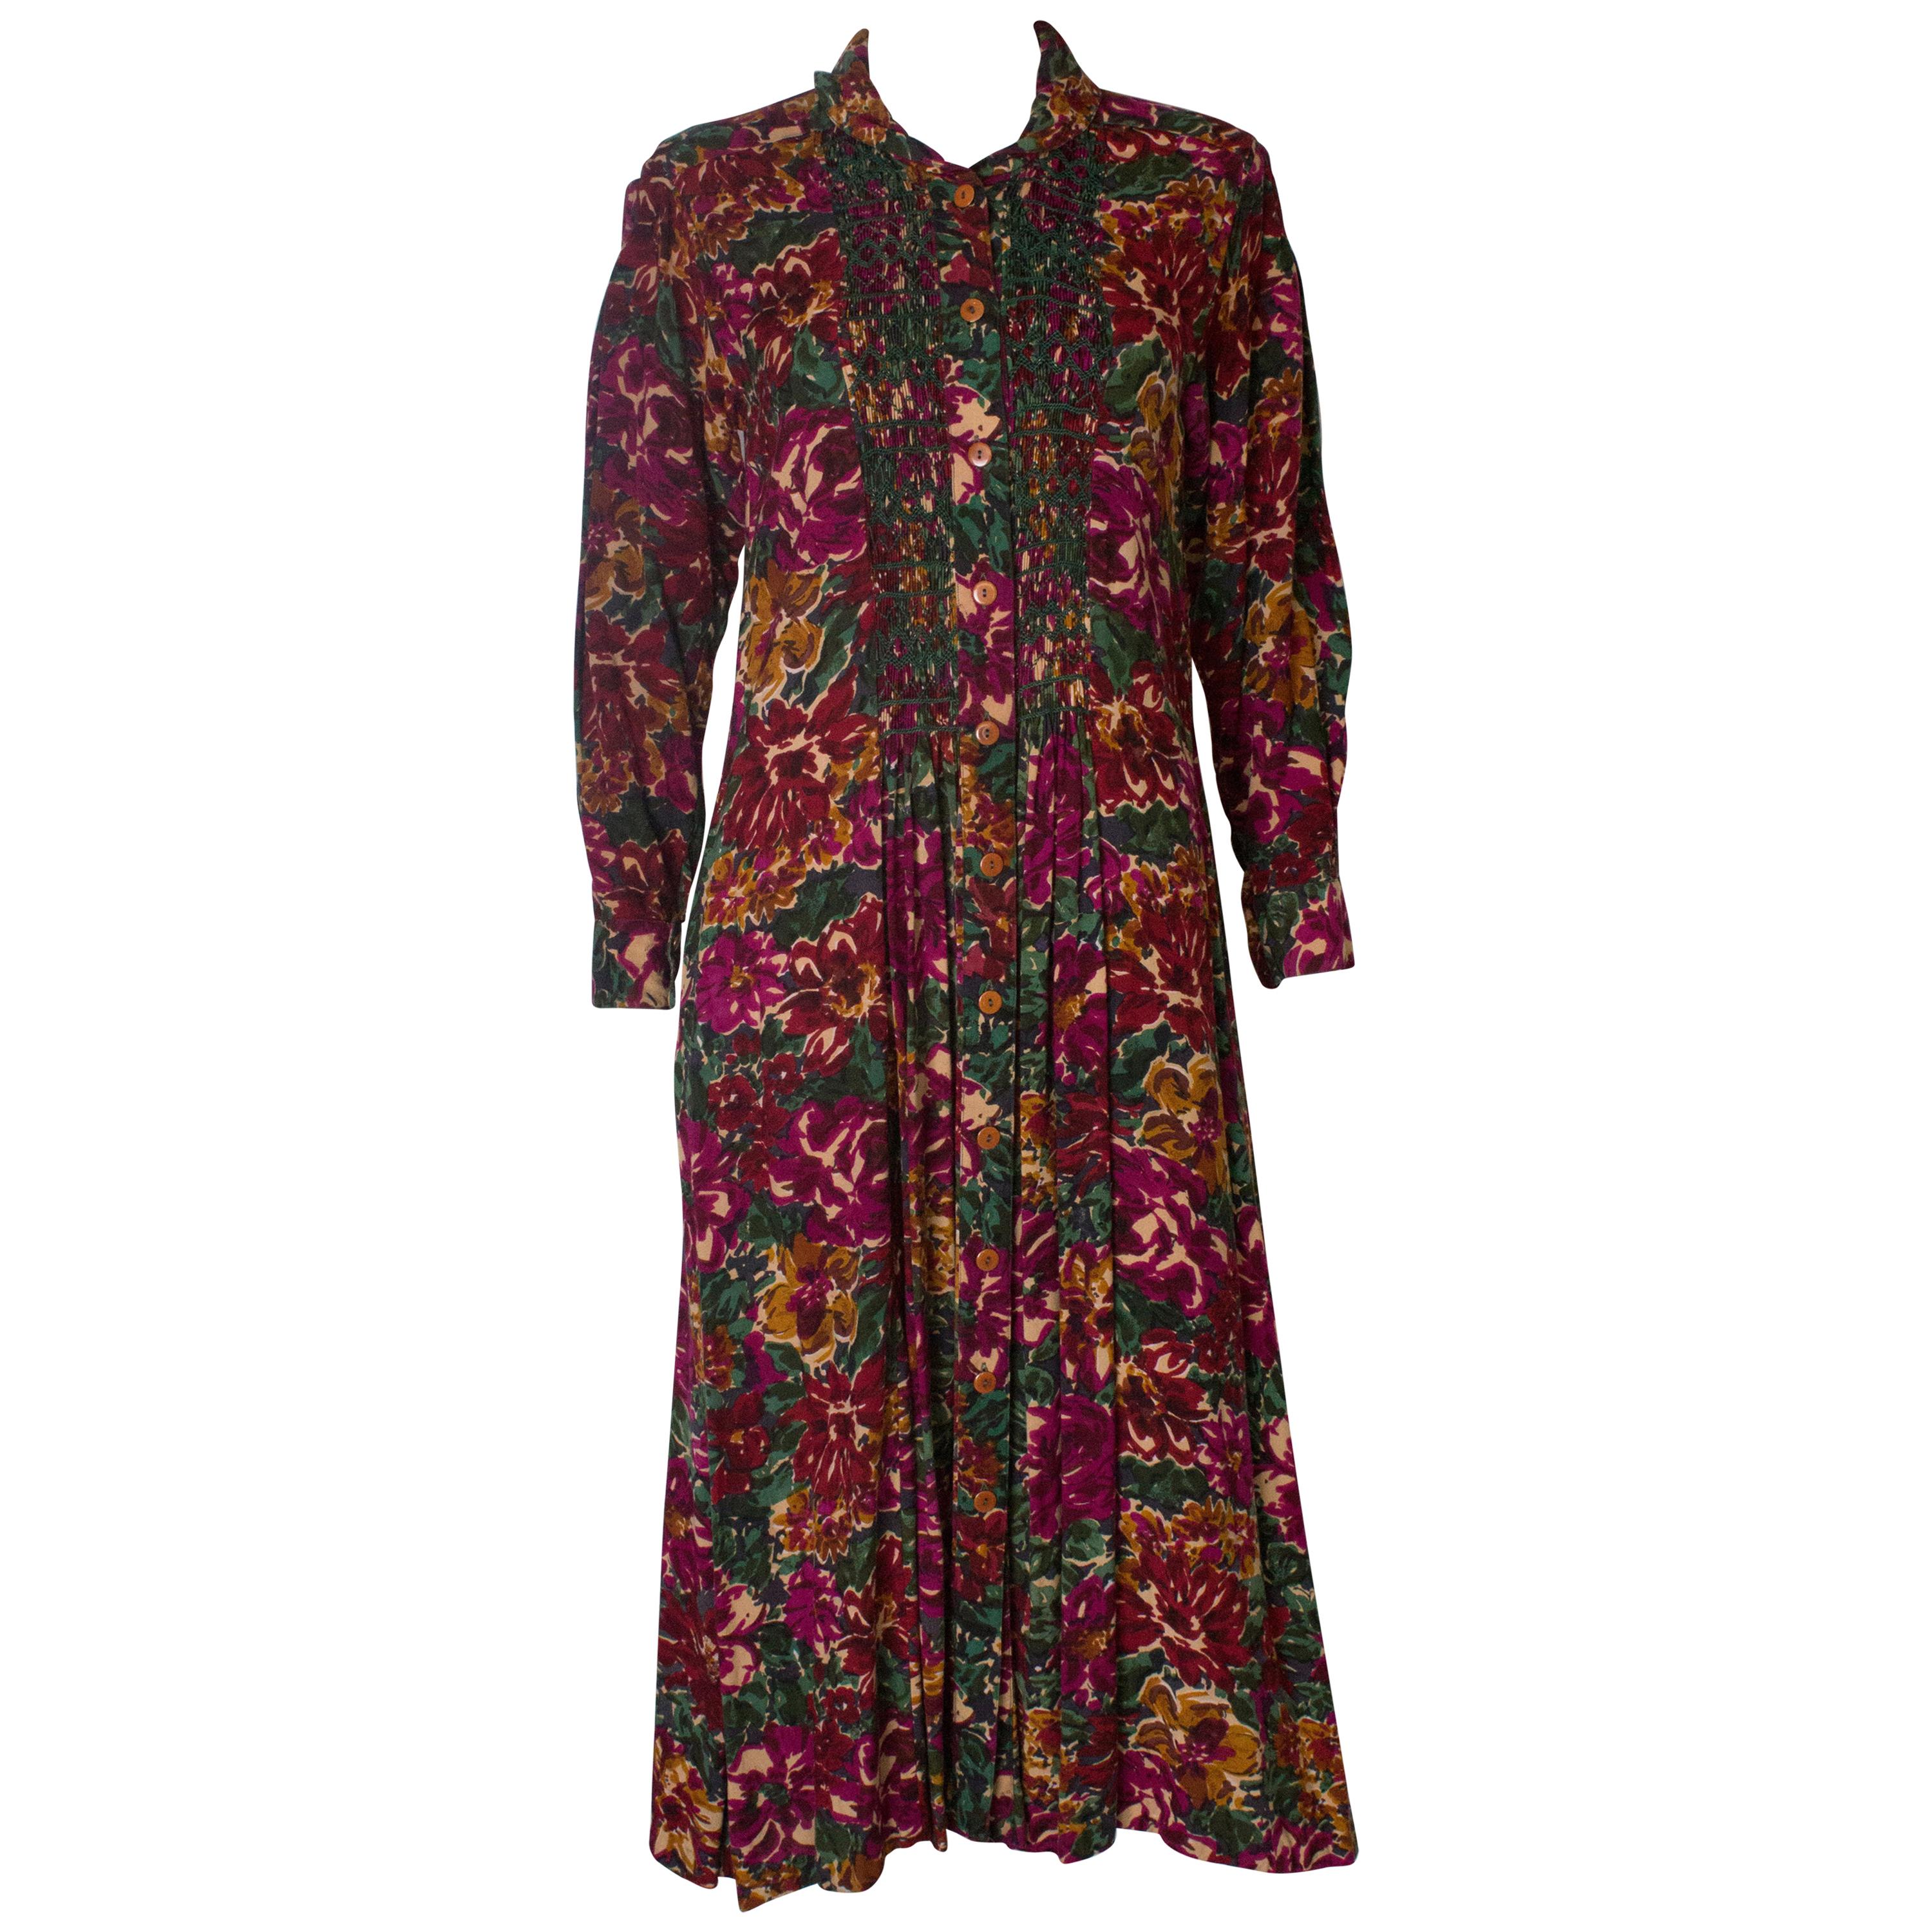 A vintage 1970s floral printed cotton day dress by Monsson